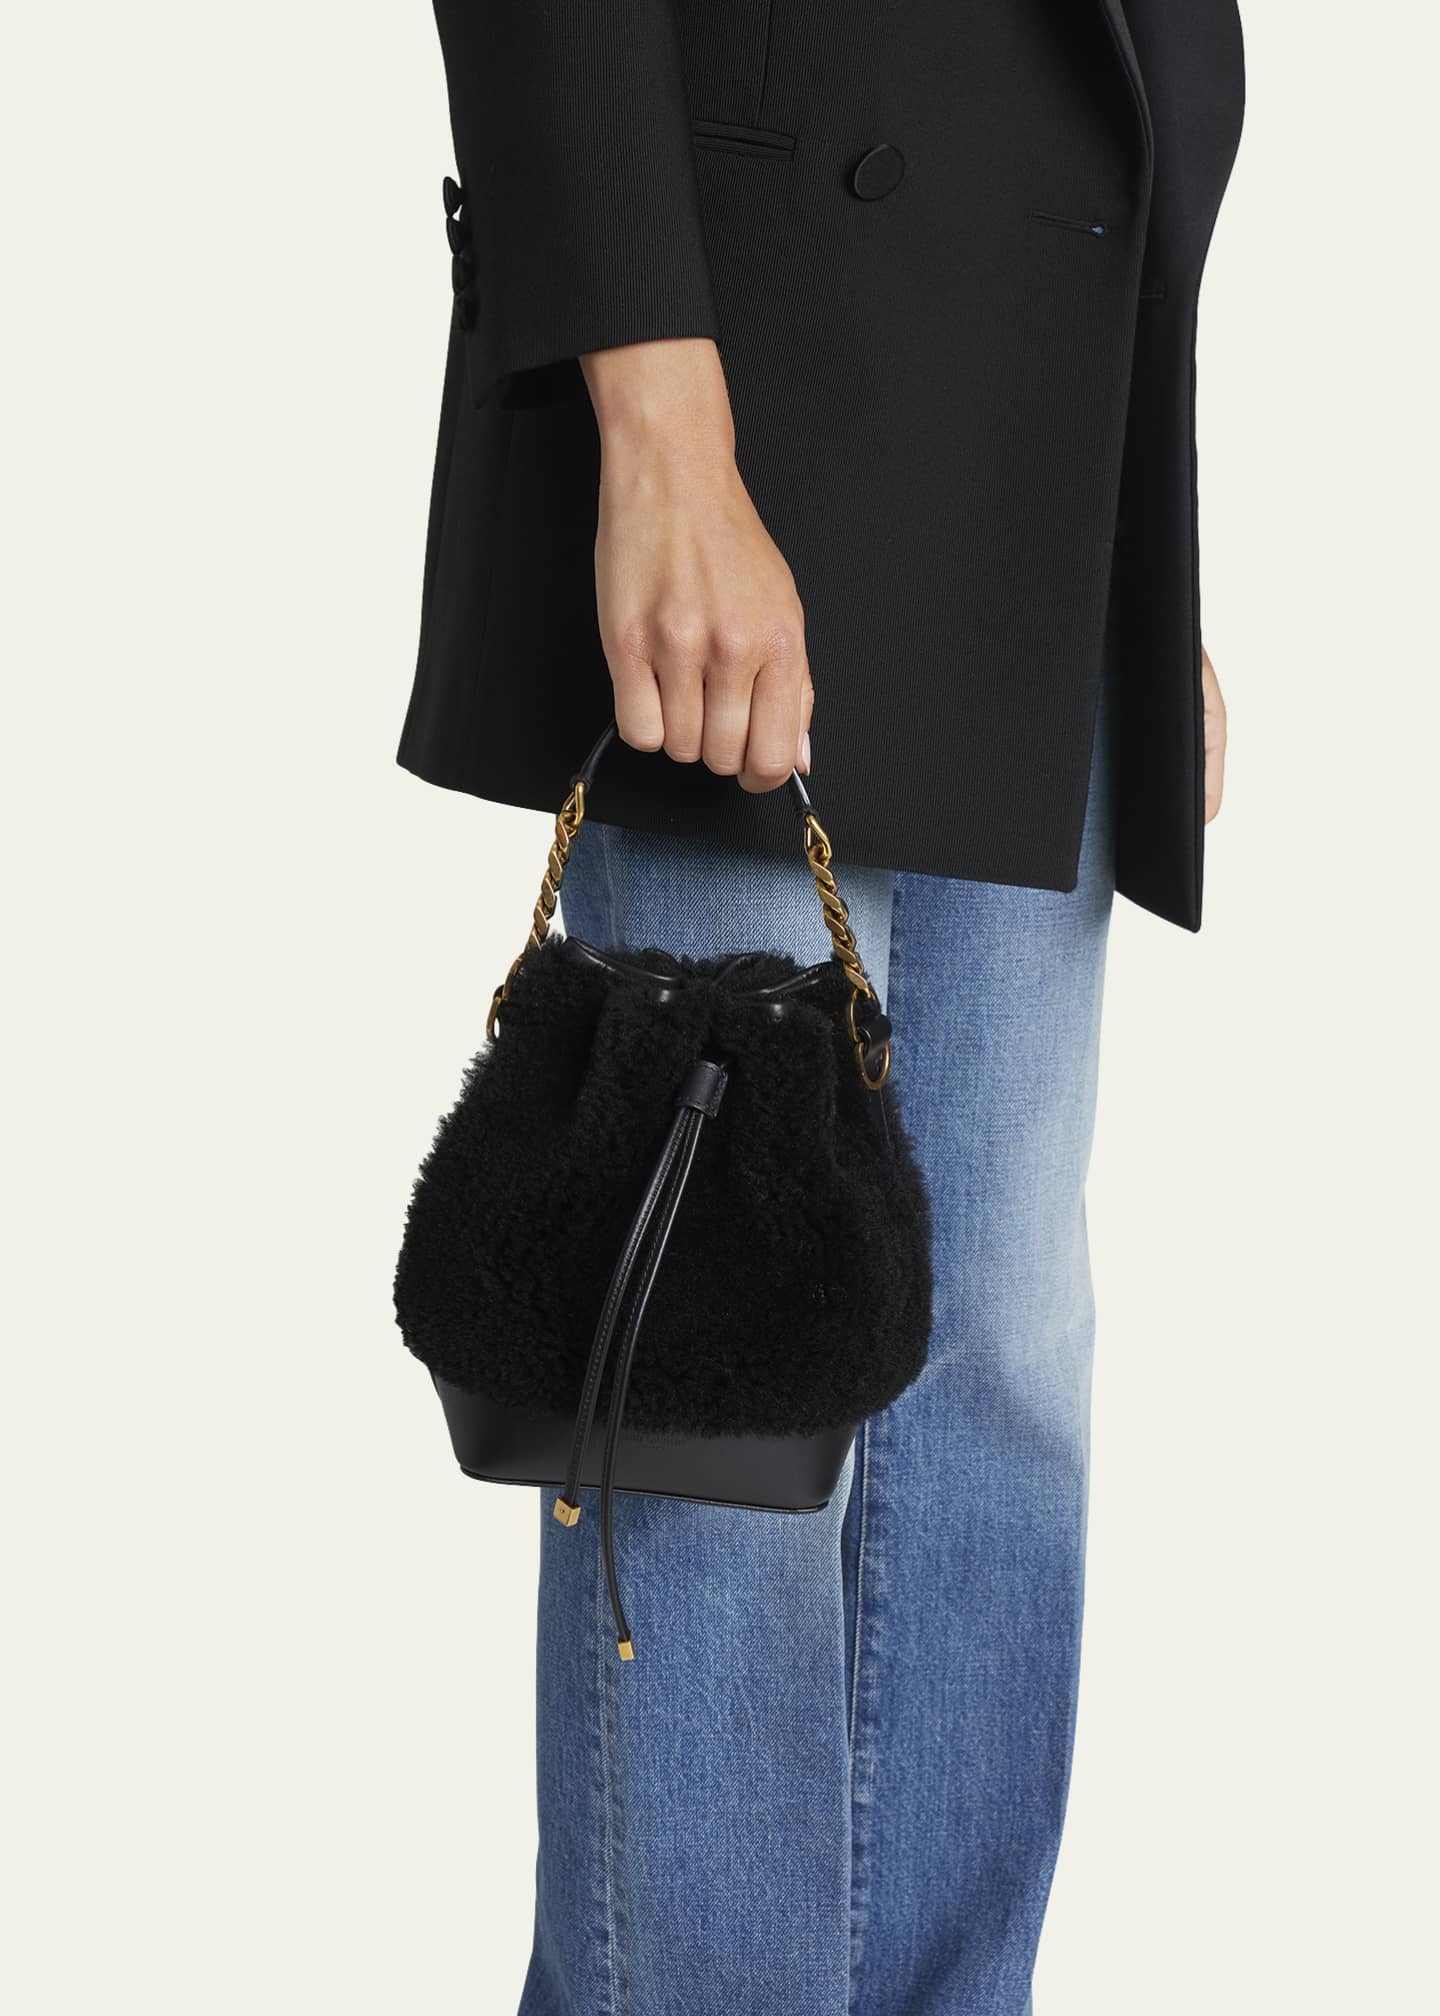 Saint Laurent Small Bucket Bag in Shearling and Leather - Bergdorf Goodman